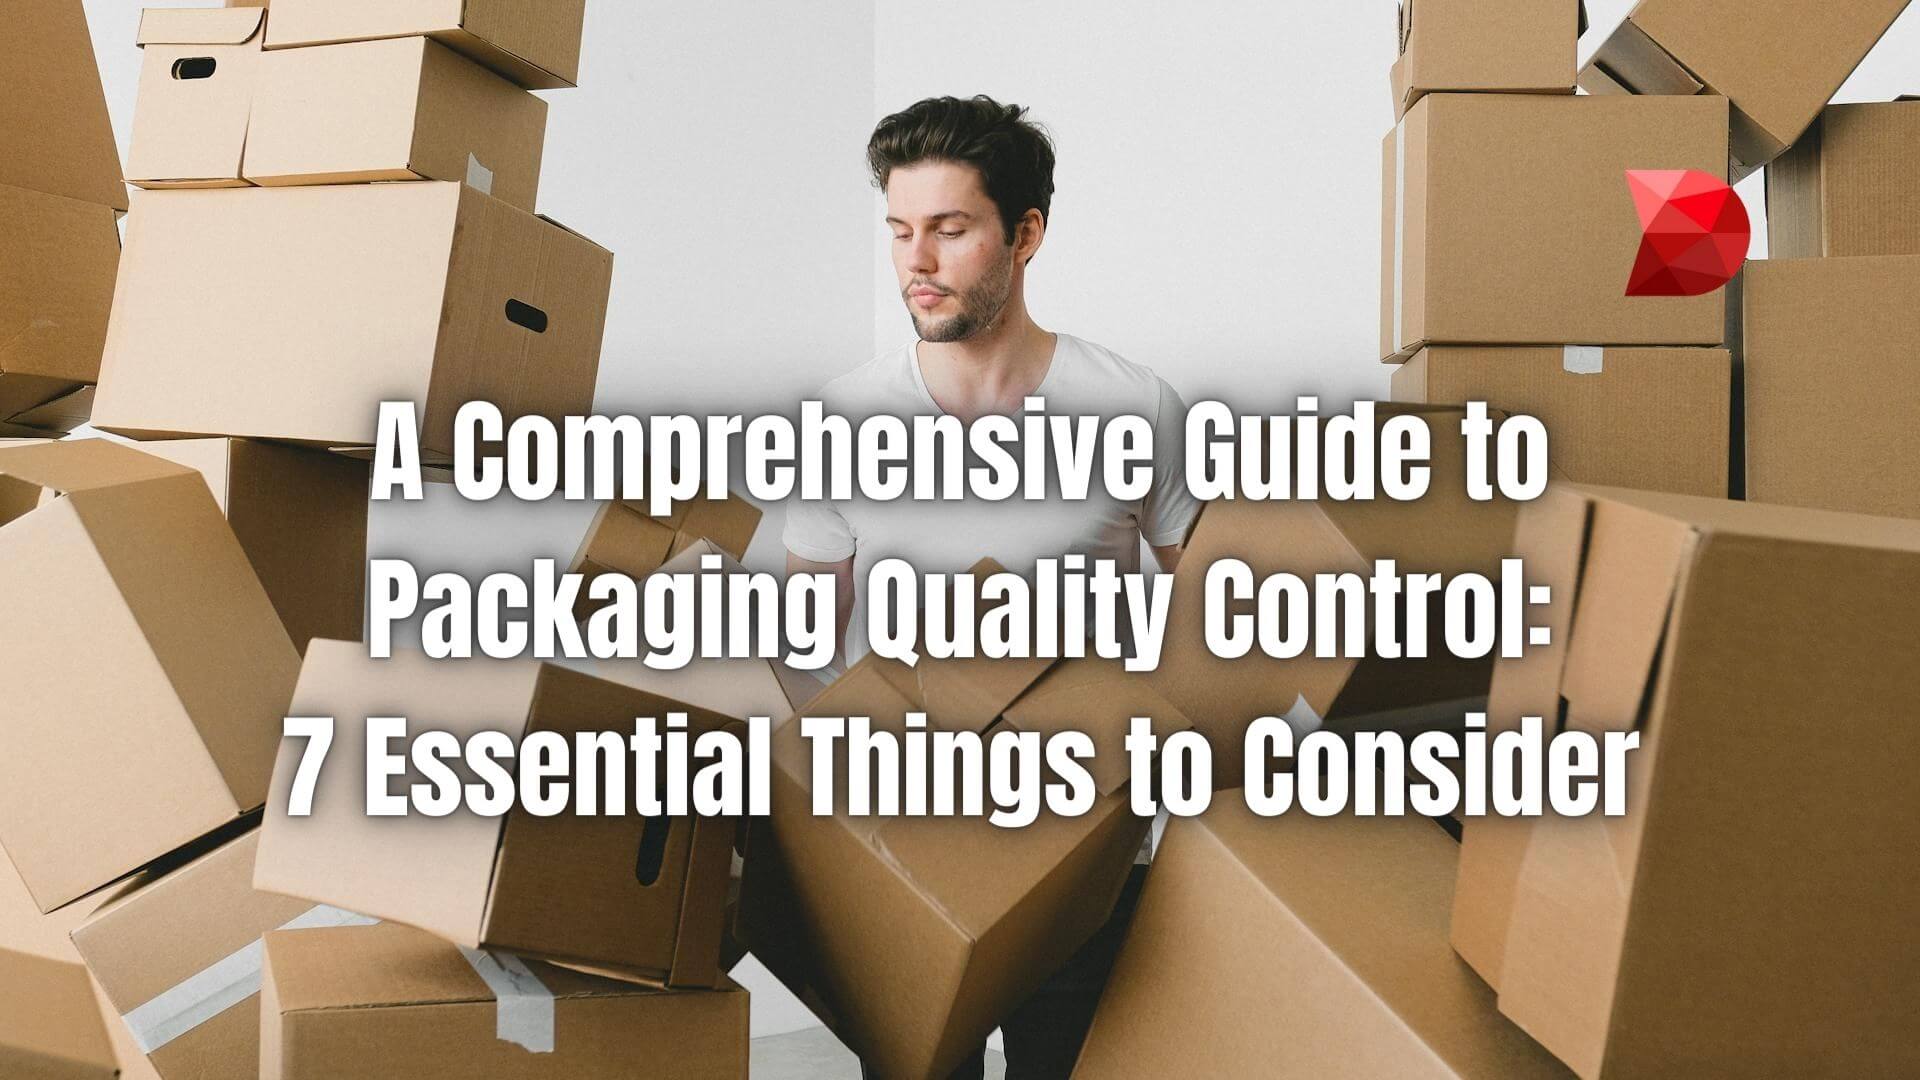 Elevate your packaging standards! Learn about the 7 crucial factors for implementing effective quality control measures in packaging.